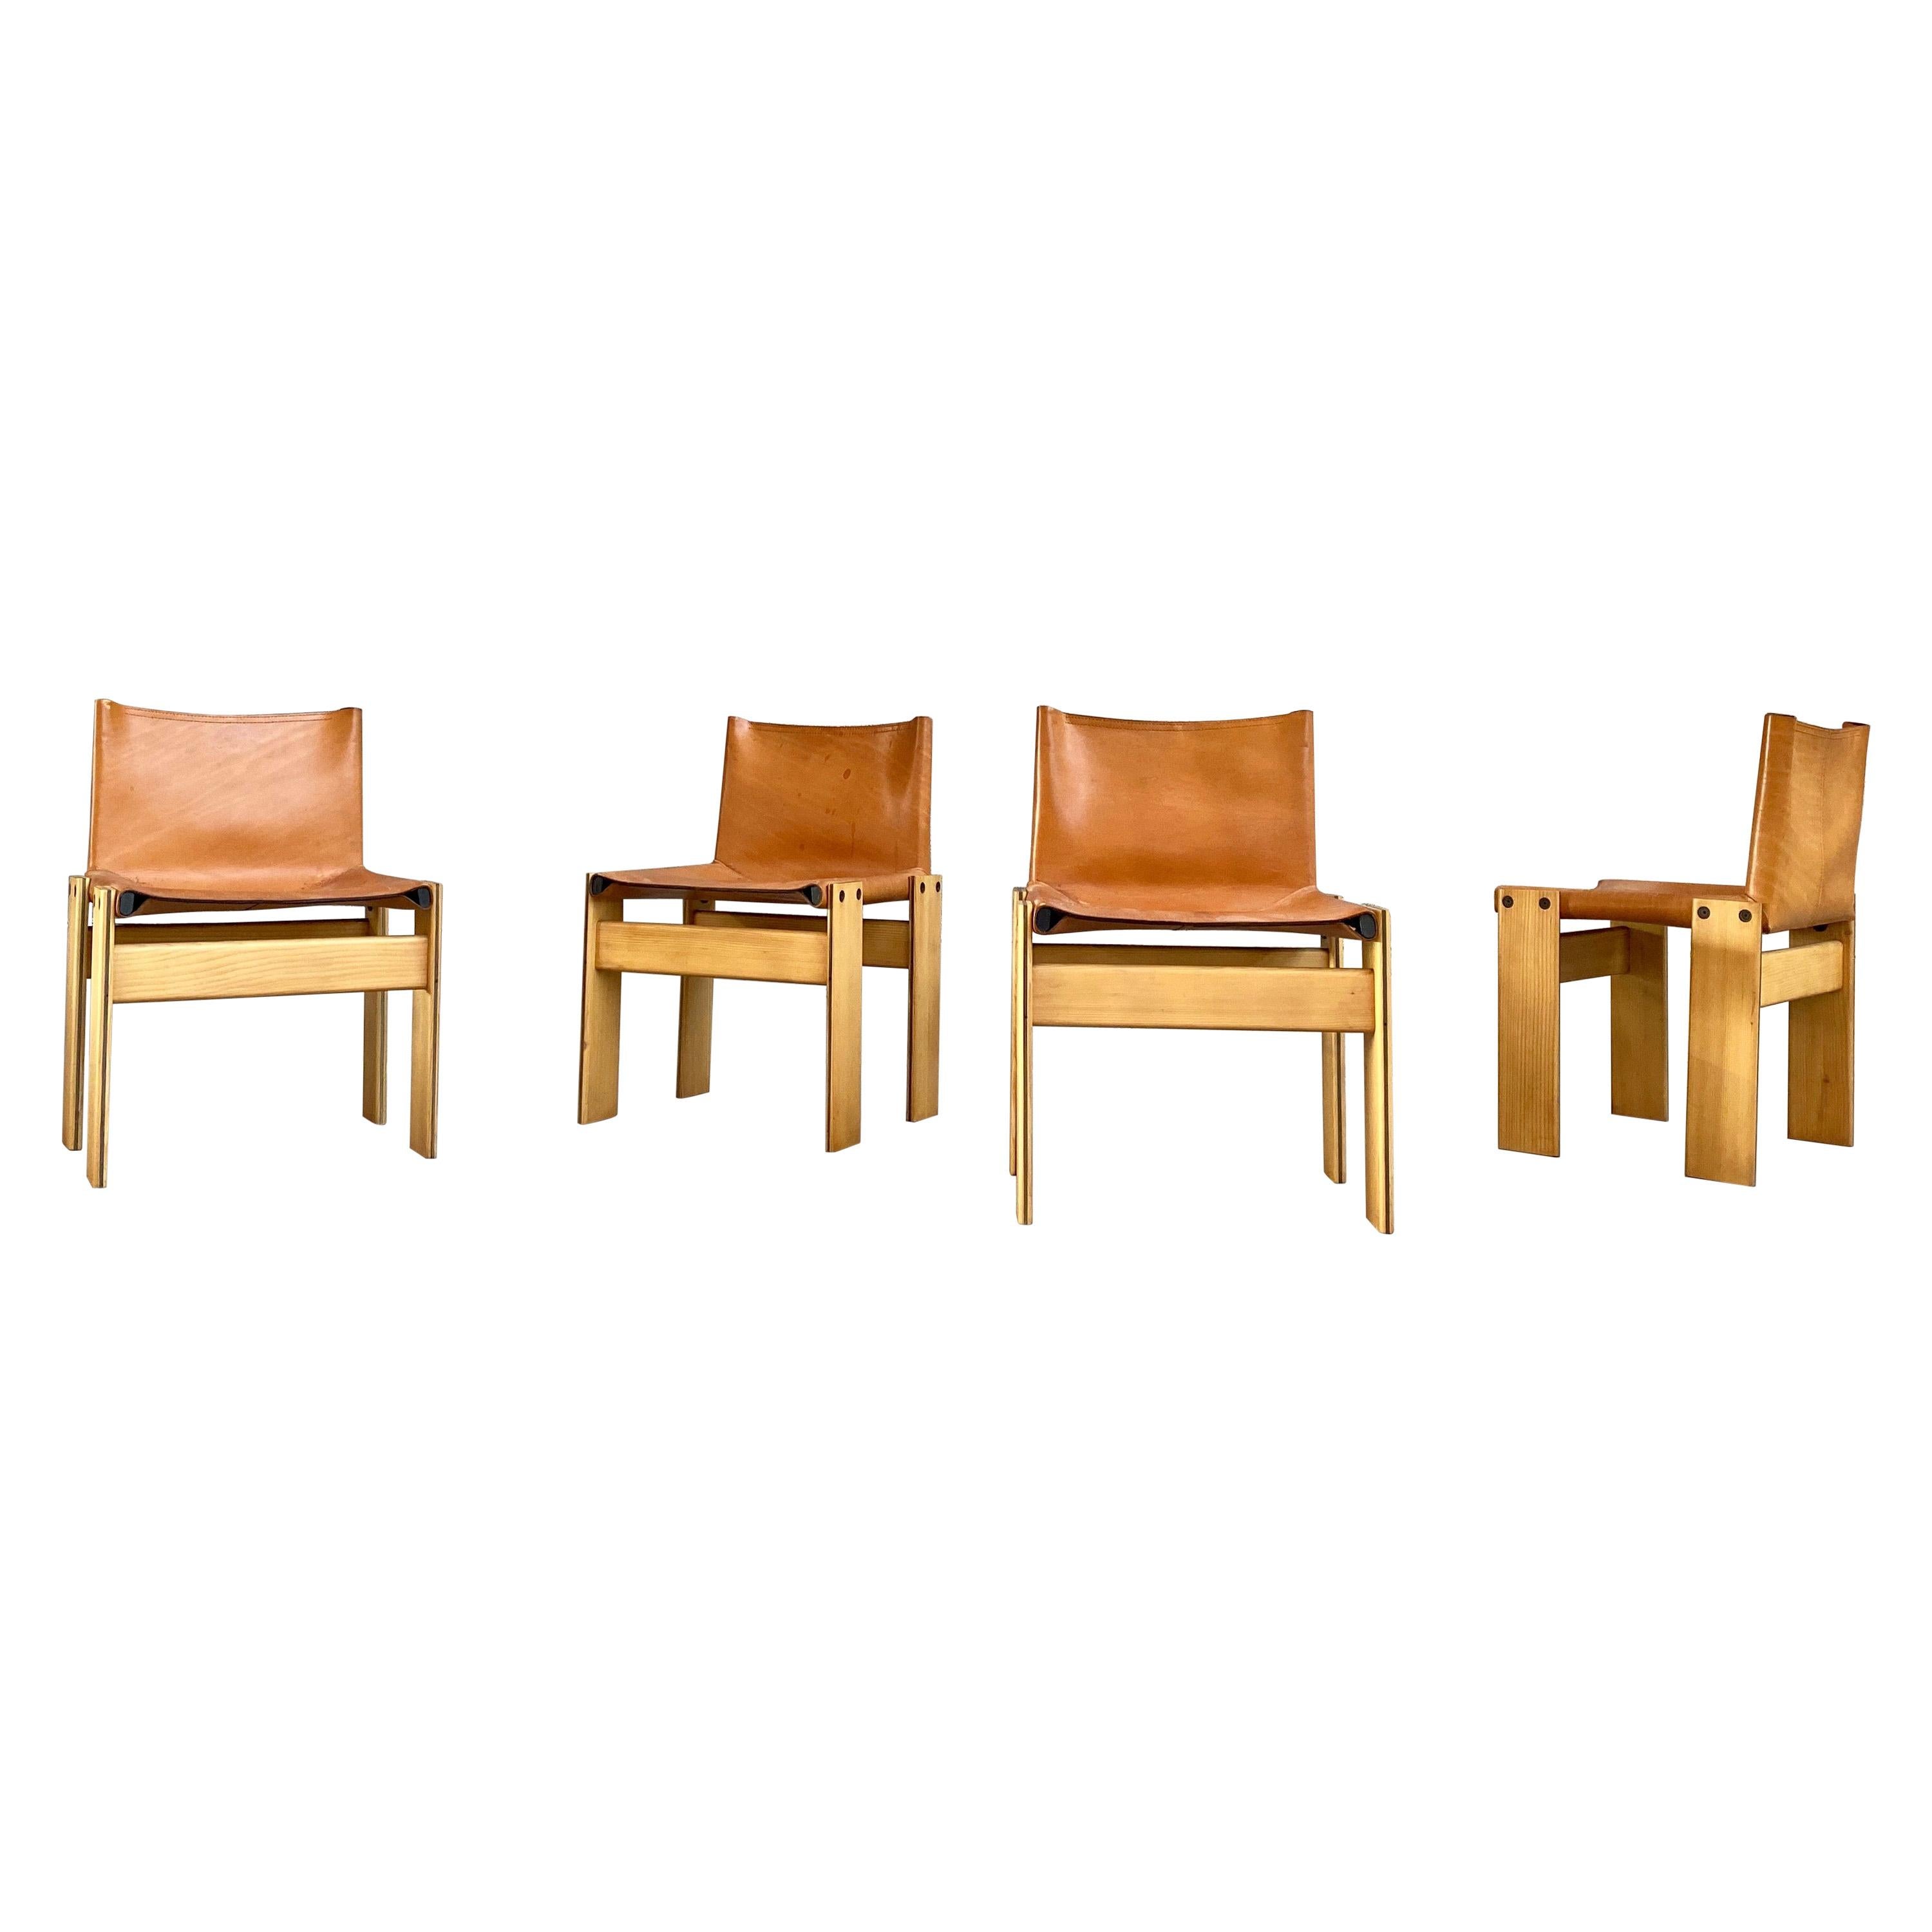 Afra & Tobia Scarpa “Monk” Dining Chairs for Molteni, 1973, Set of 4